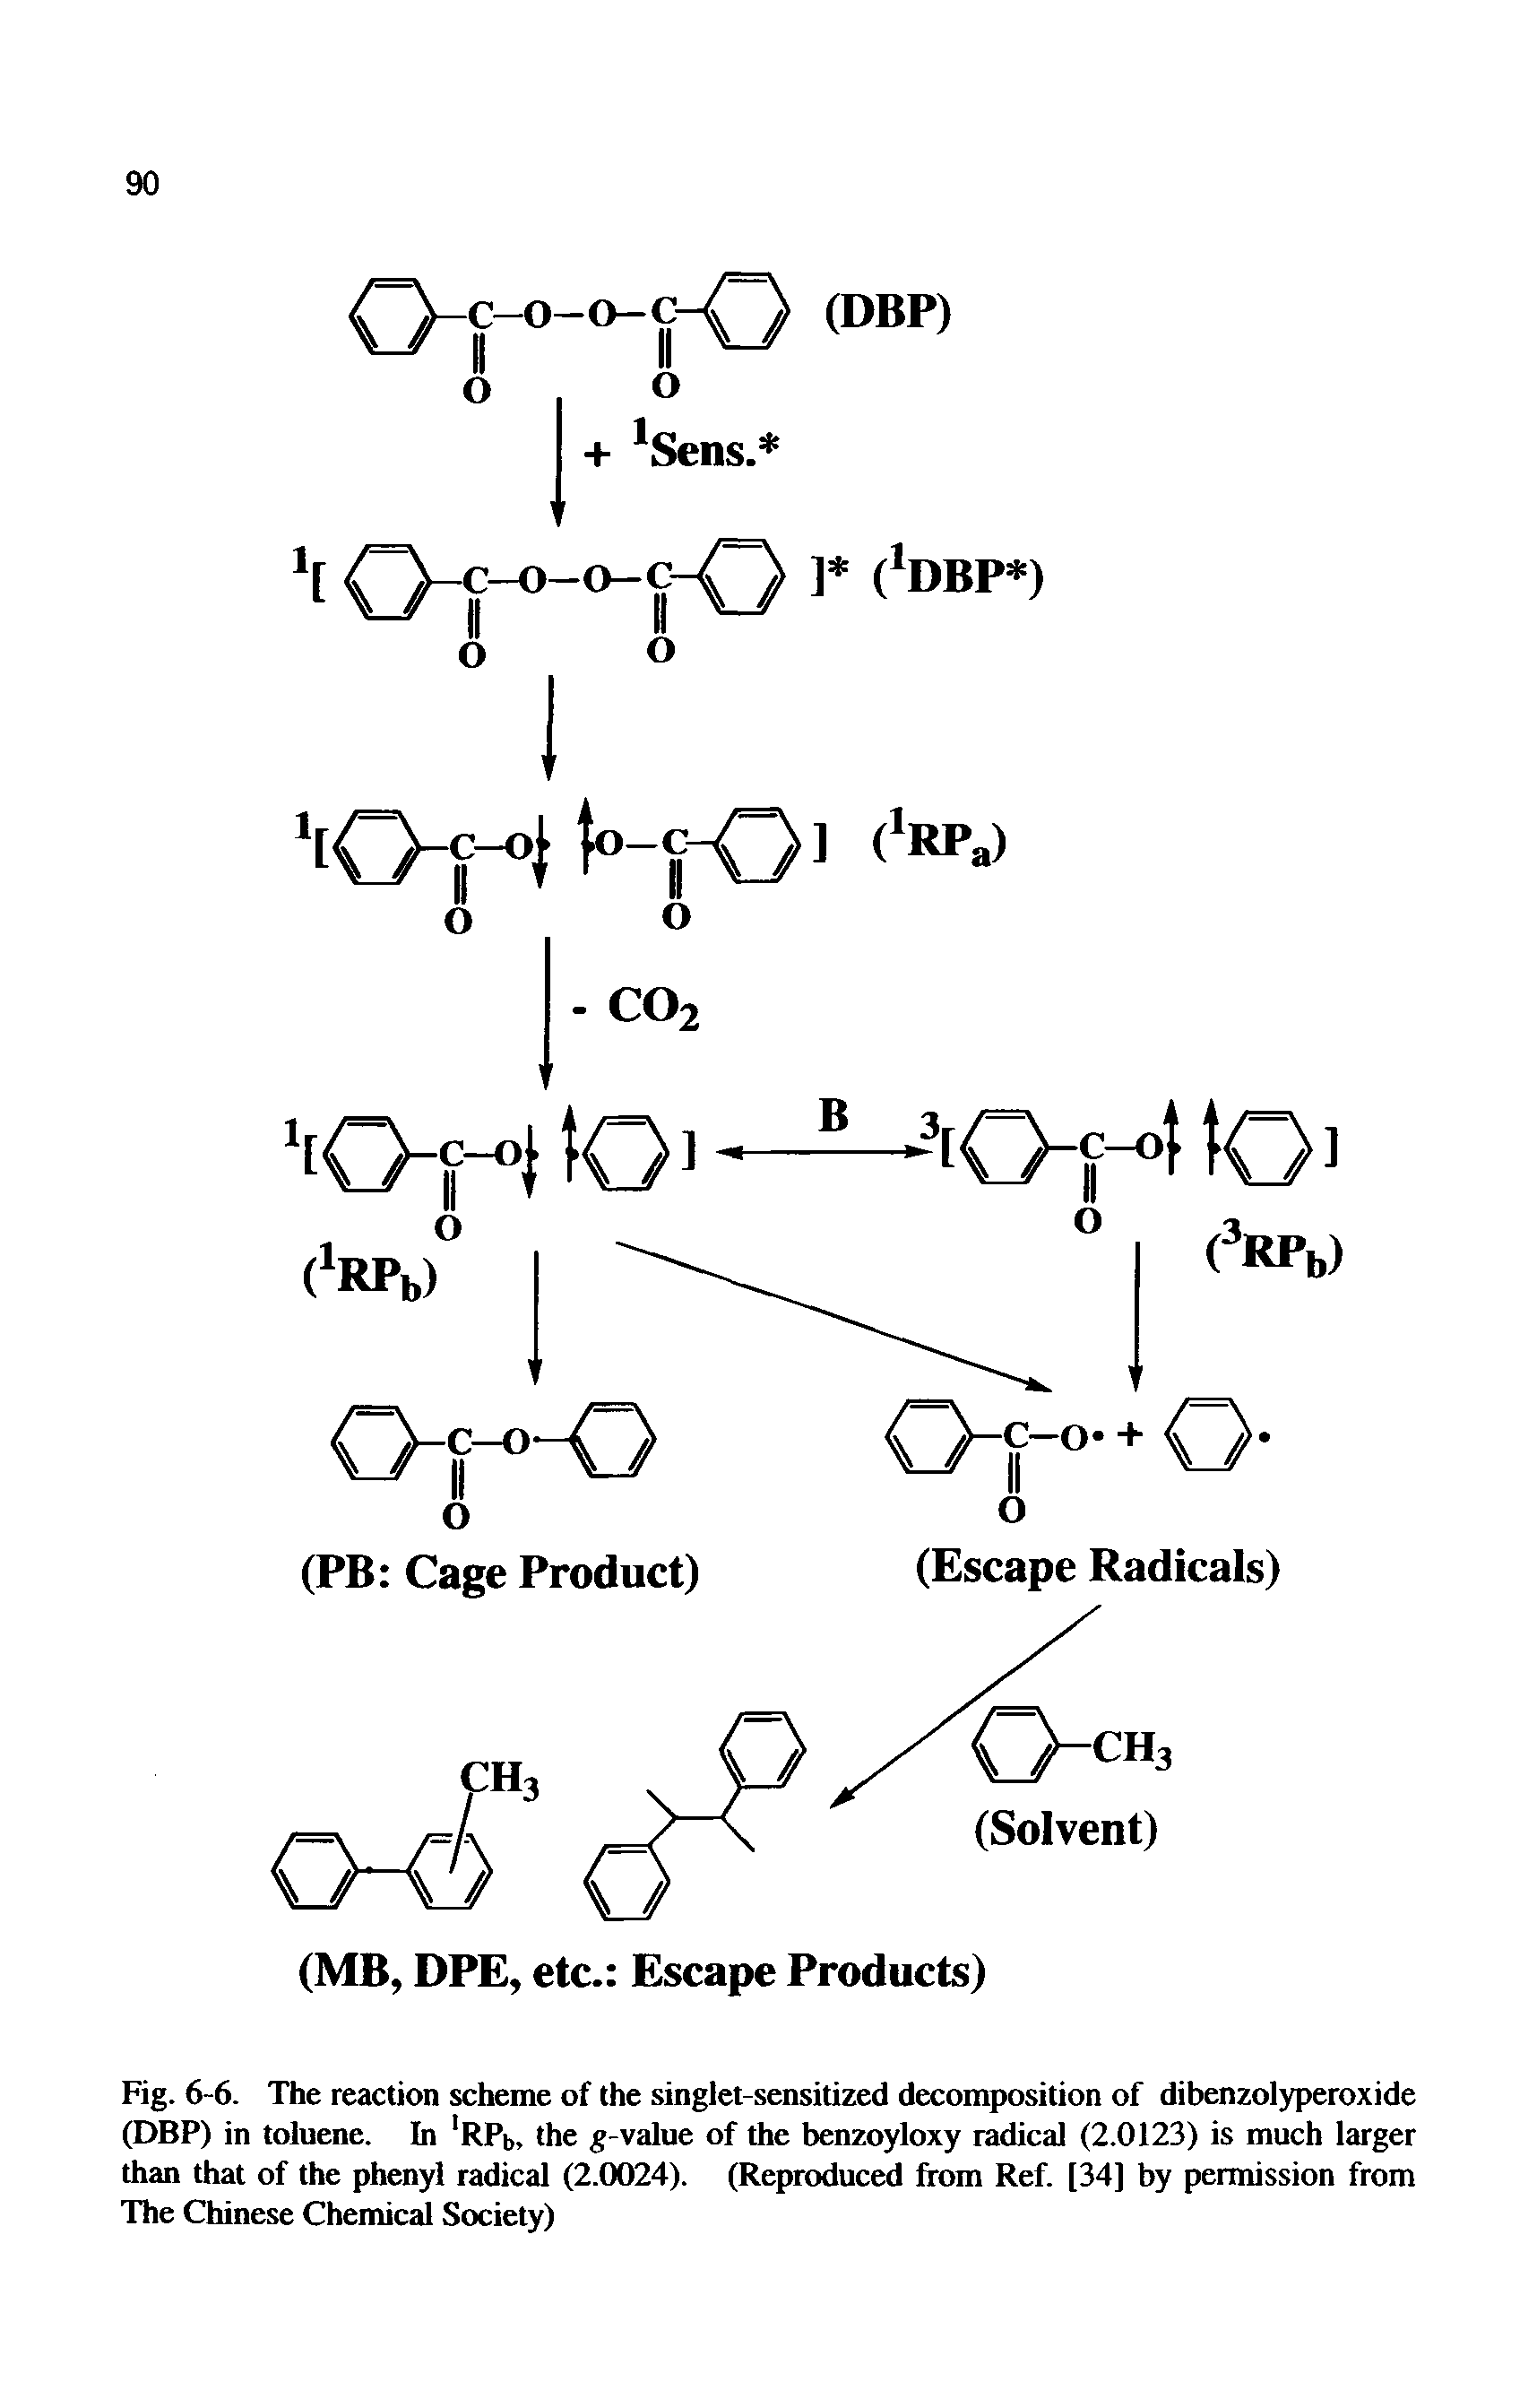 Fig. 6-6. The reaction scheme of the singlet-sensitized decomposition of dibenzolyperoxide (DBP) in toluene. In RPb, the g-value of the benzoyloxy radical (2.0123) is much larger than that of the phenyl radical (2.0024). (Reproduced from Ref. [34] by permission from The Chinese Chemical Society)...